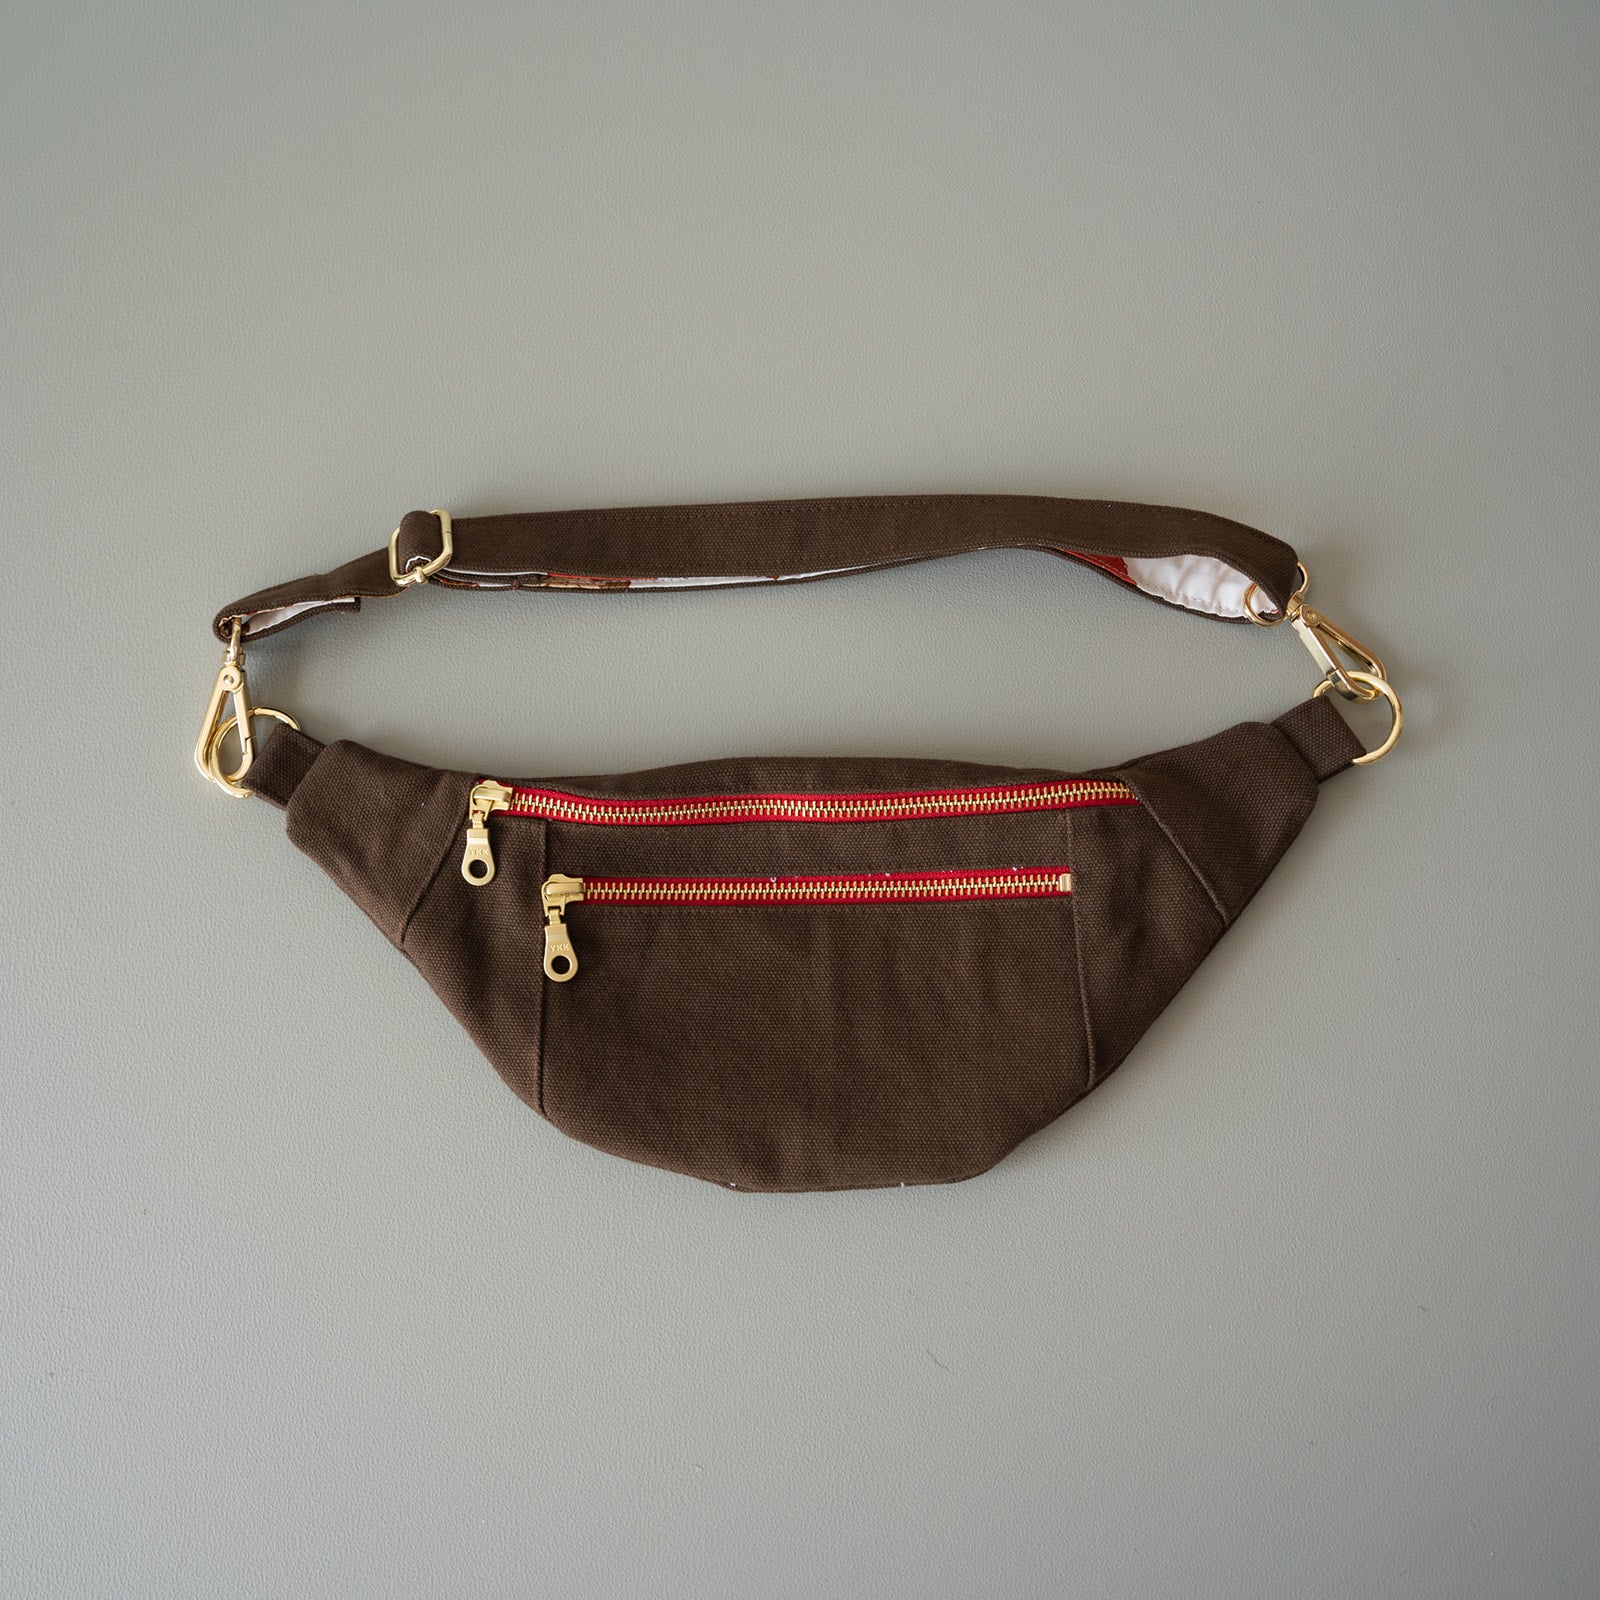 Andie Hipster Bag (fanny pack)